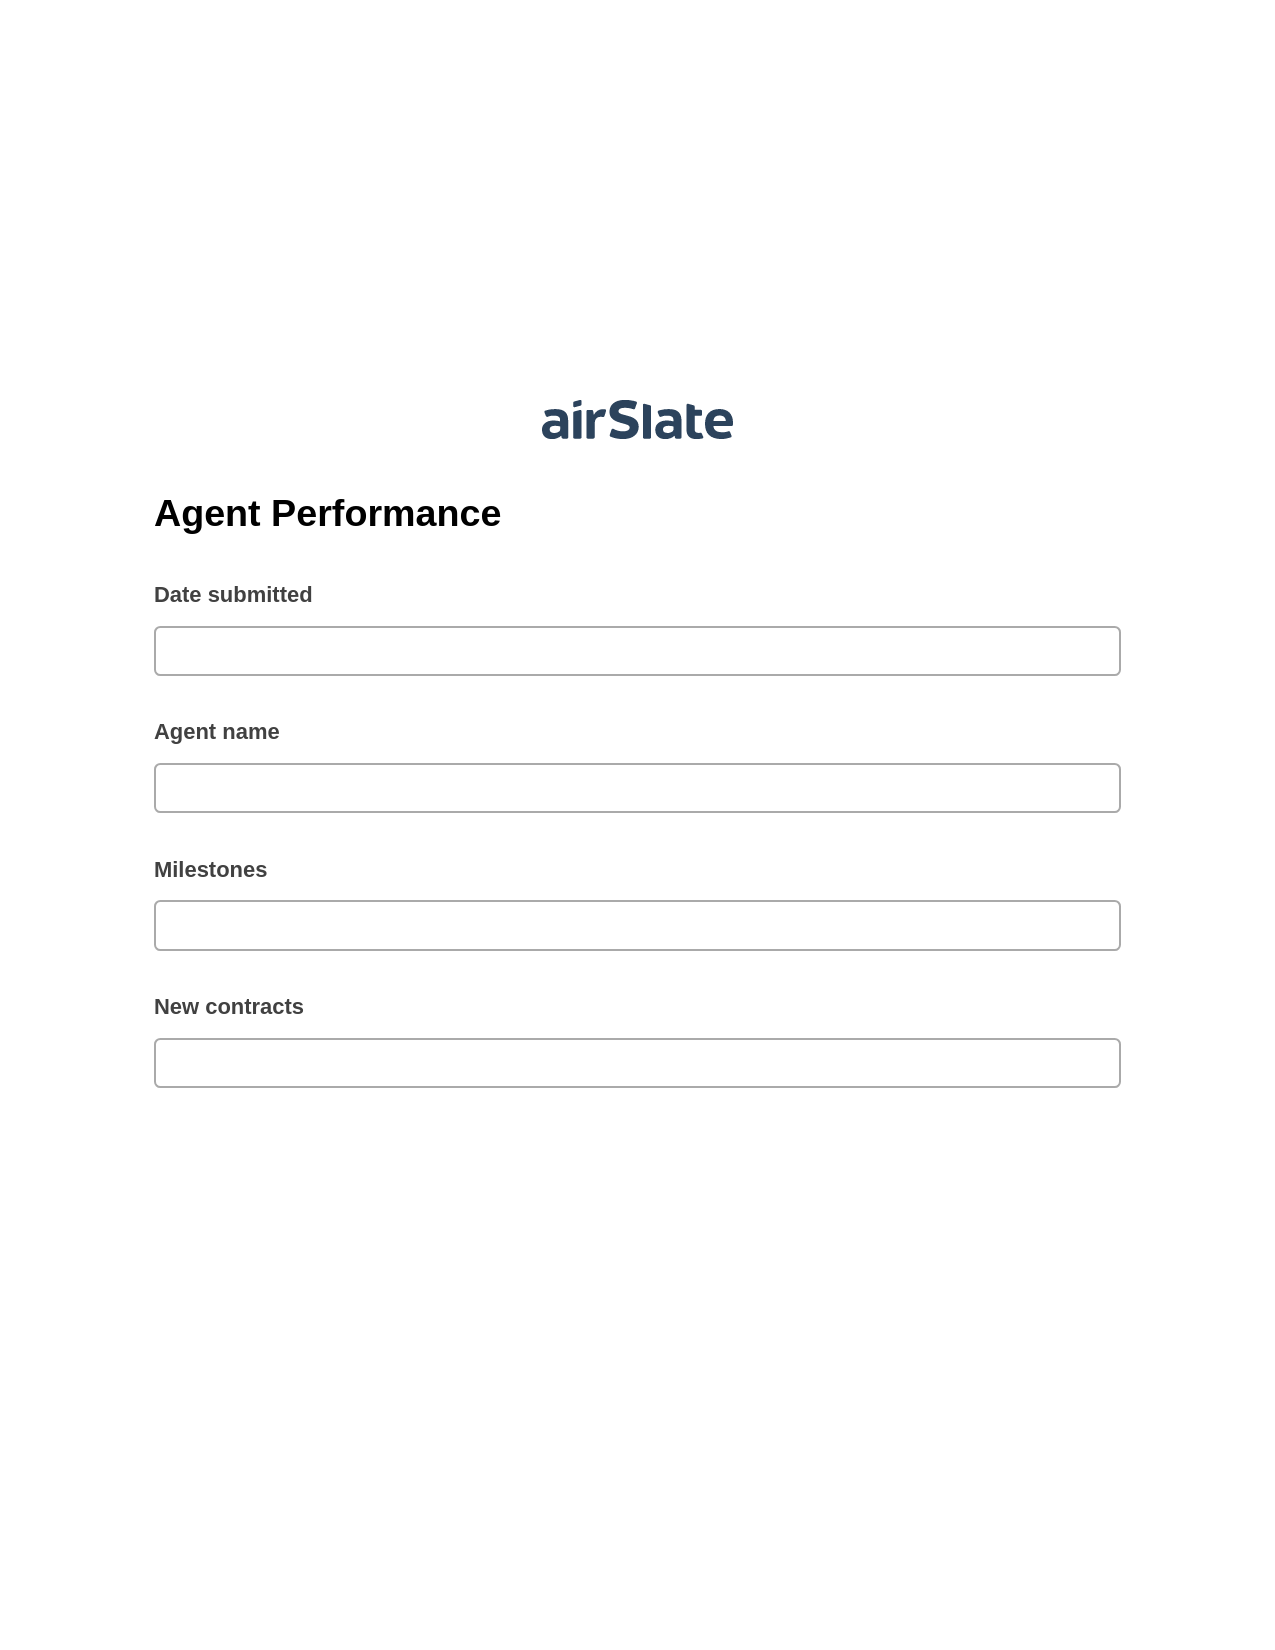 Agent Performance Pre-fill from another Slate Bot, Create Salesforce Records Bot, Post-finish Document Bot